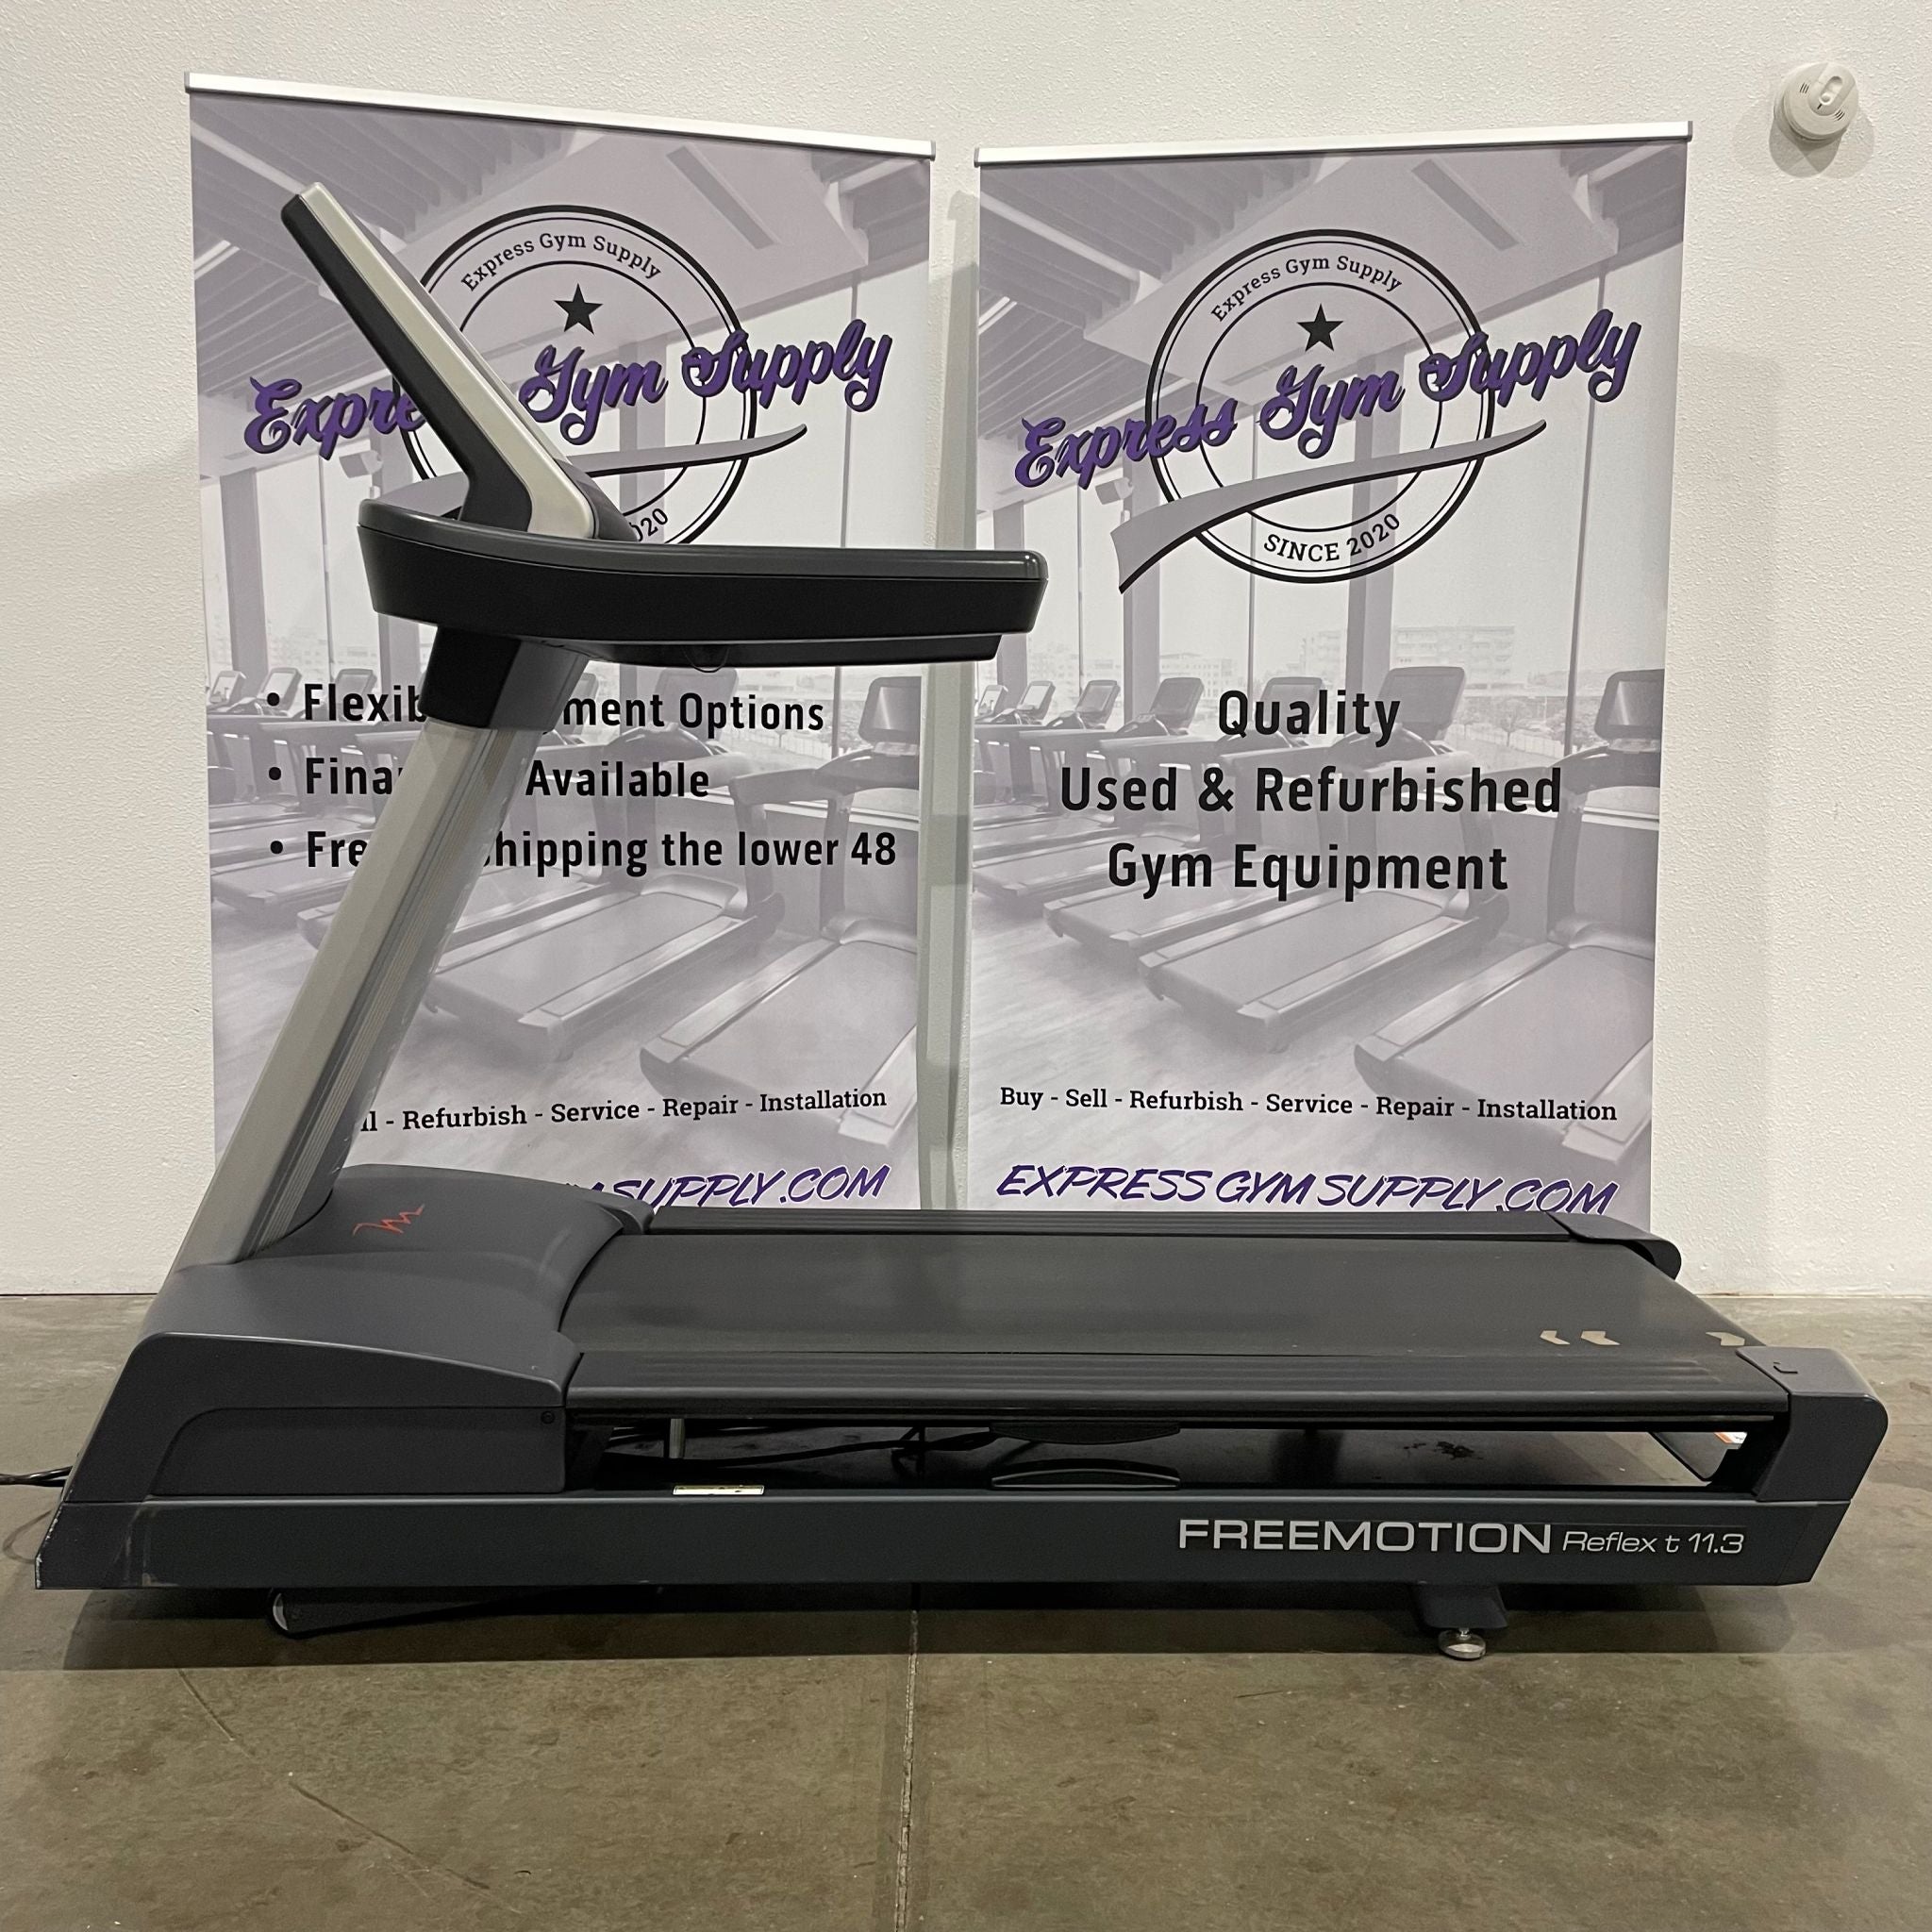 Lefthand view of the Freemotion Reflex t11.3 Treadmill in Warehouse